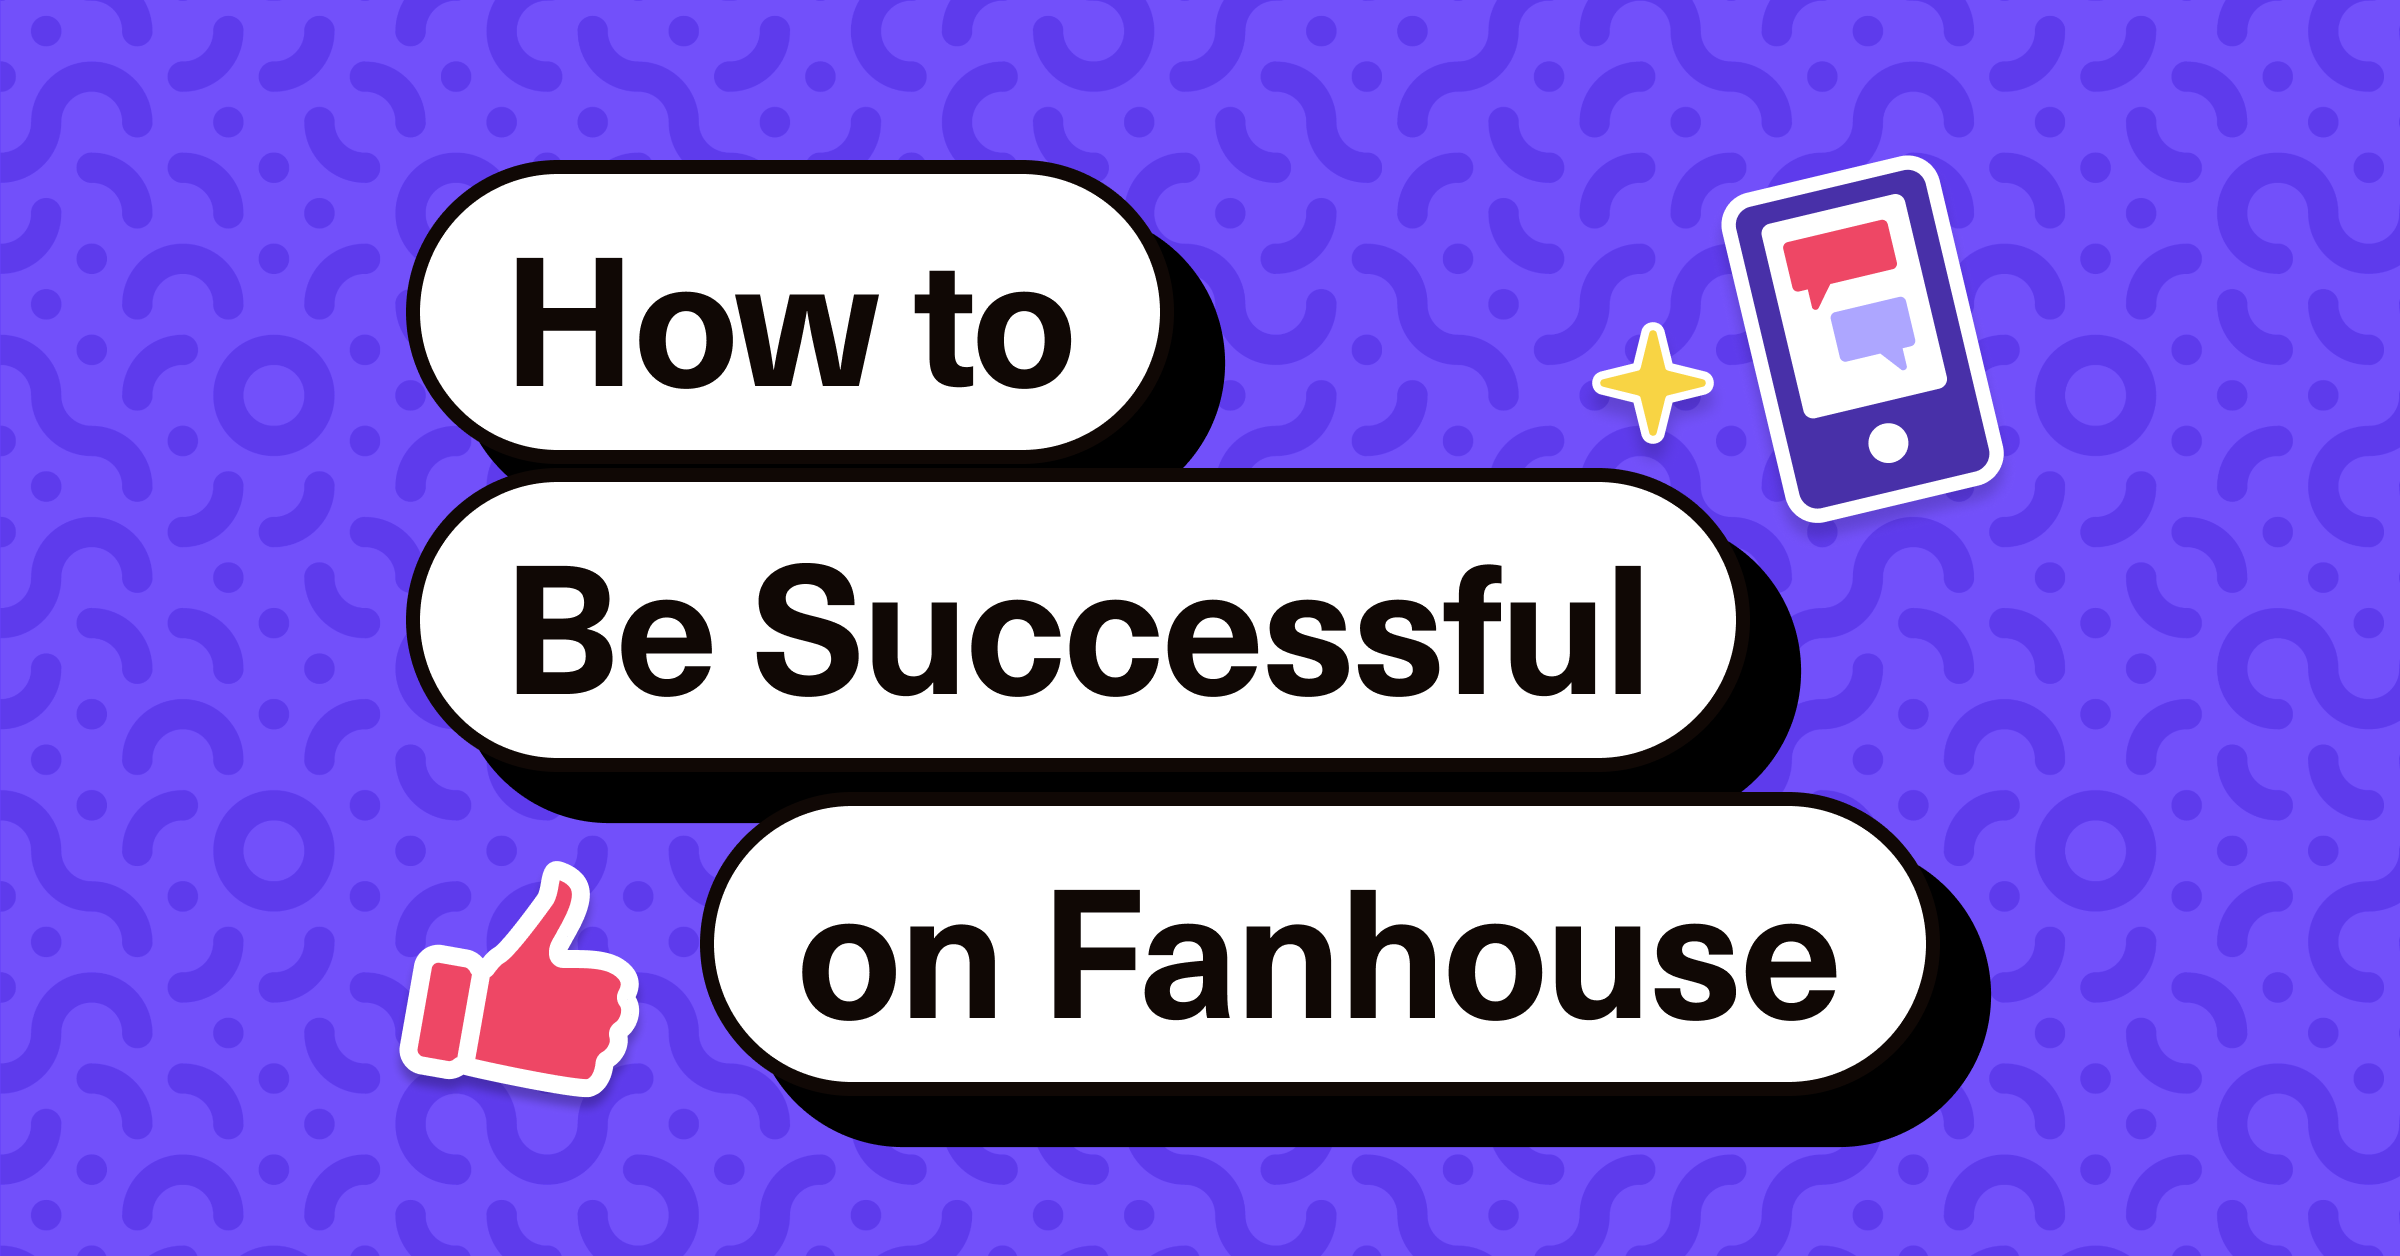 How To Be Successful On Fanhouse